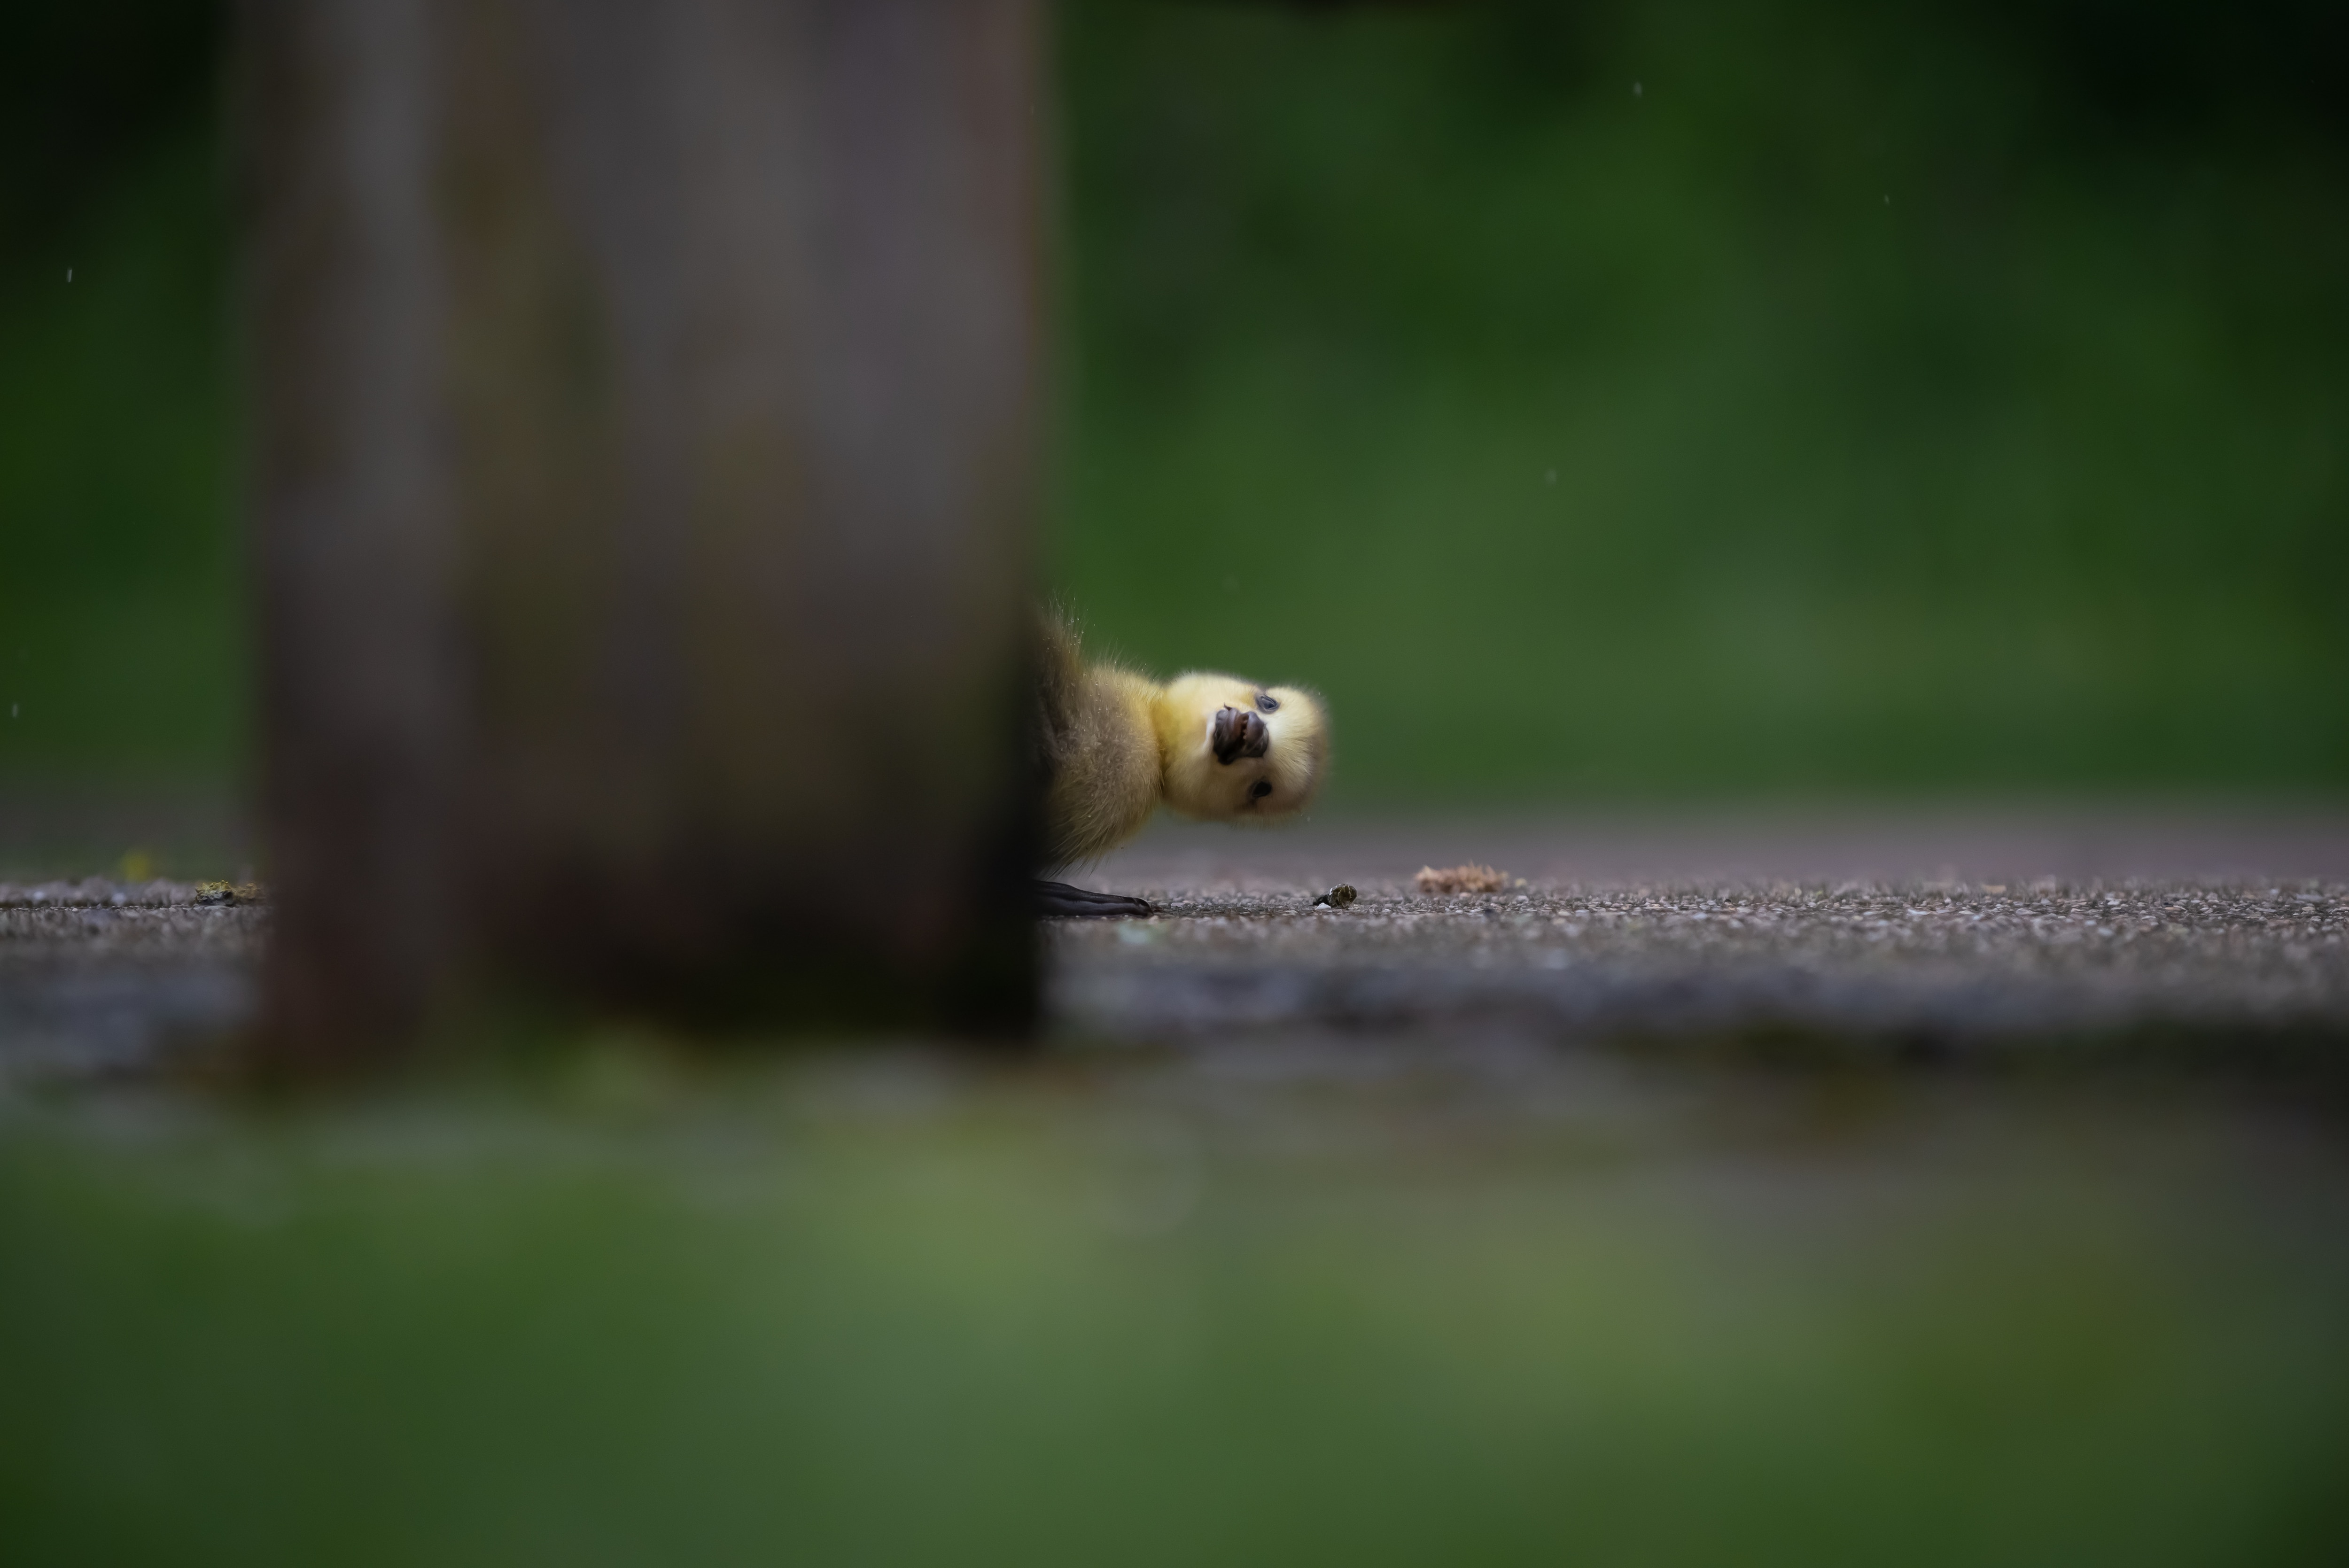 Duckling behind fence